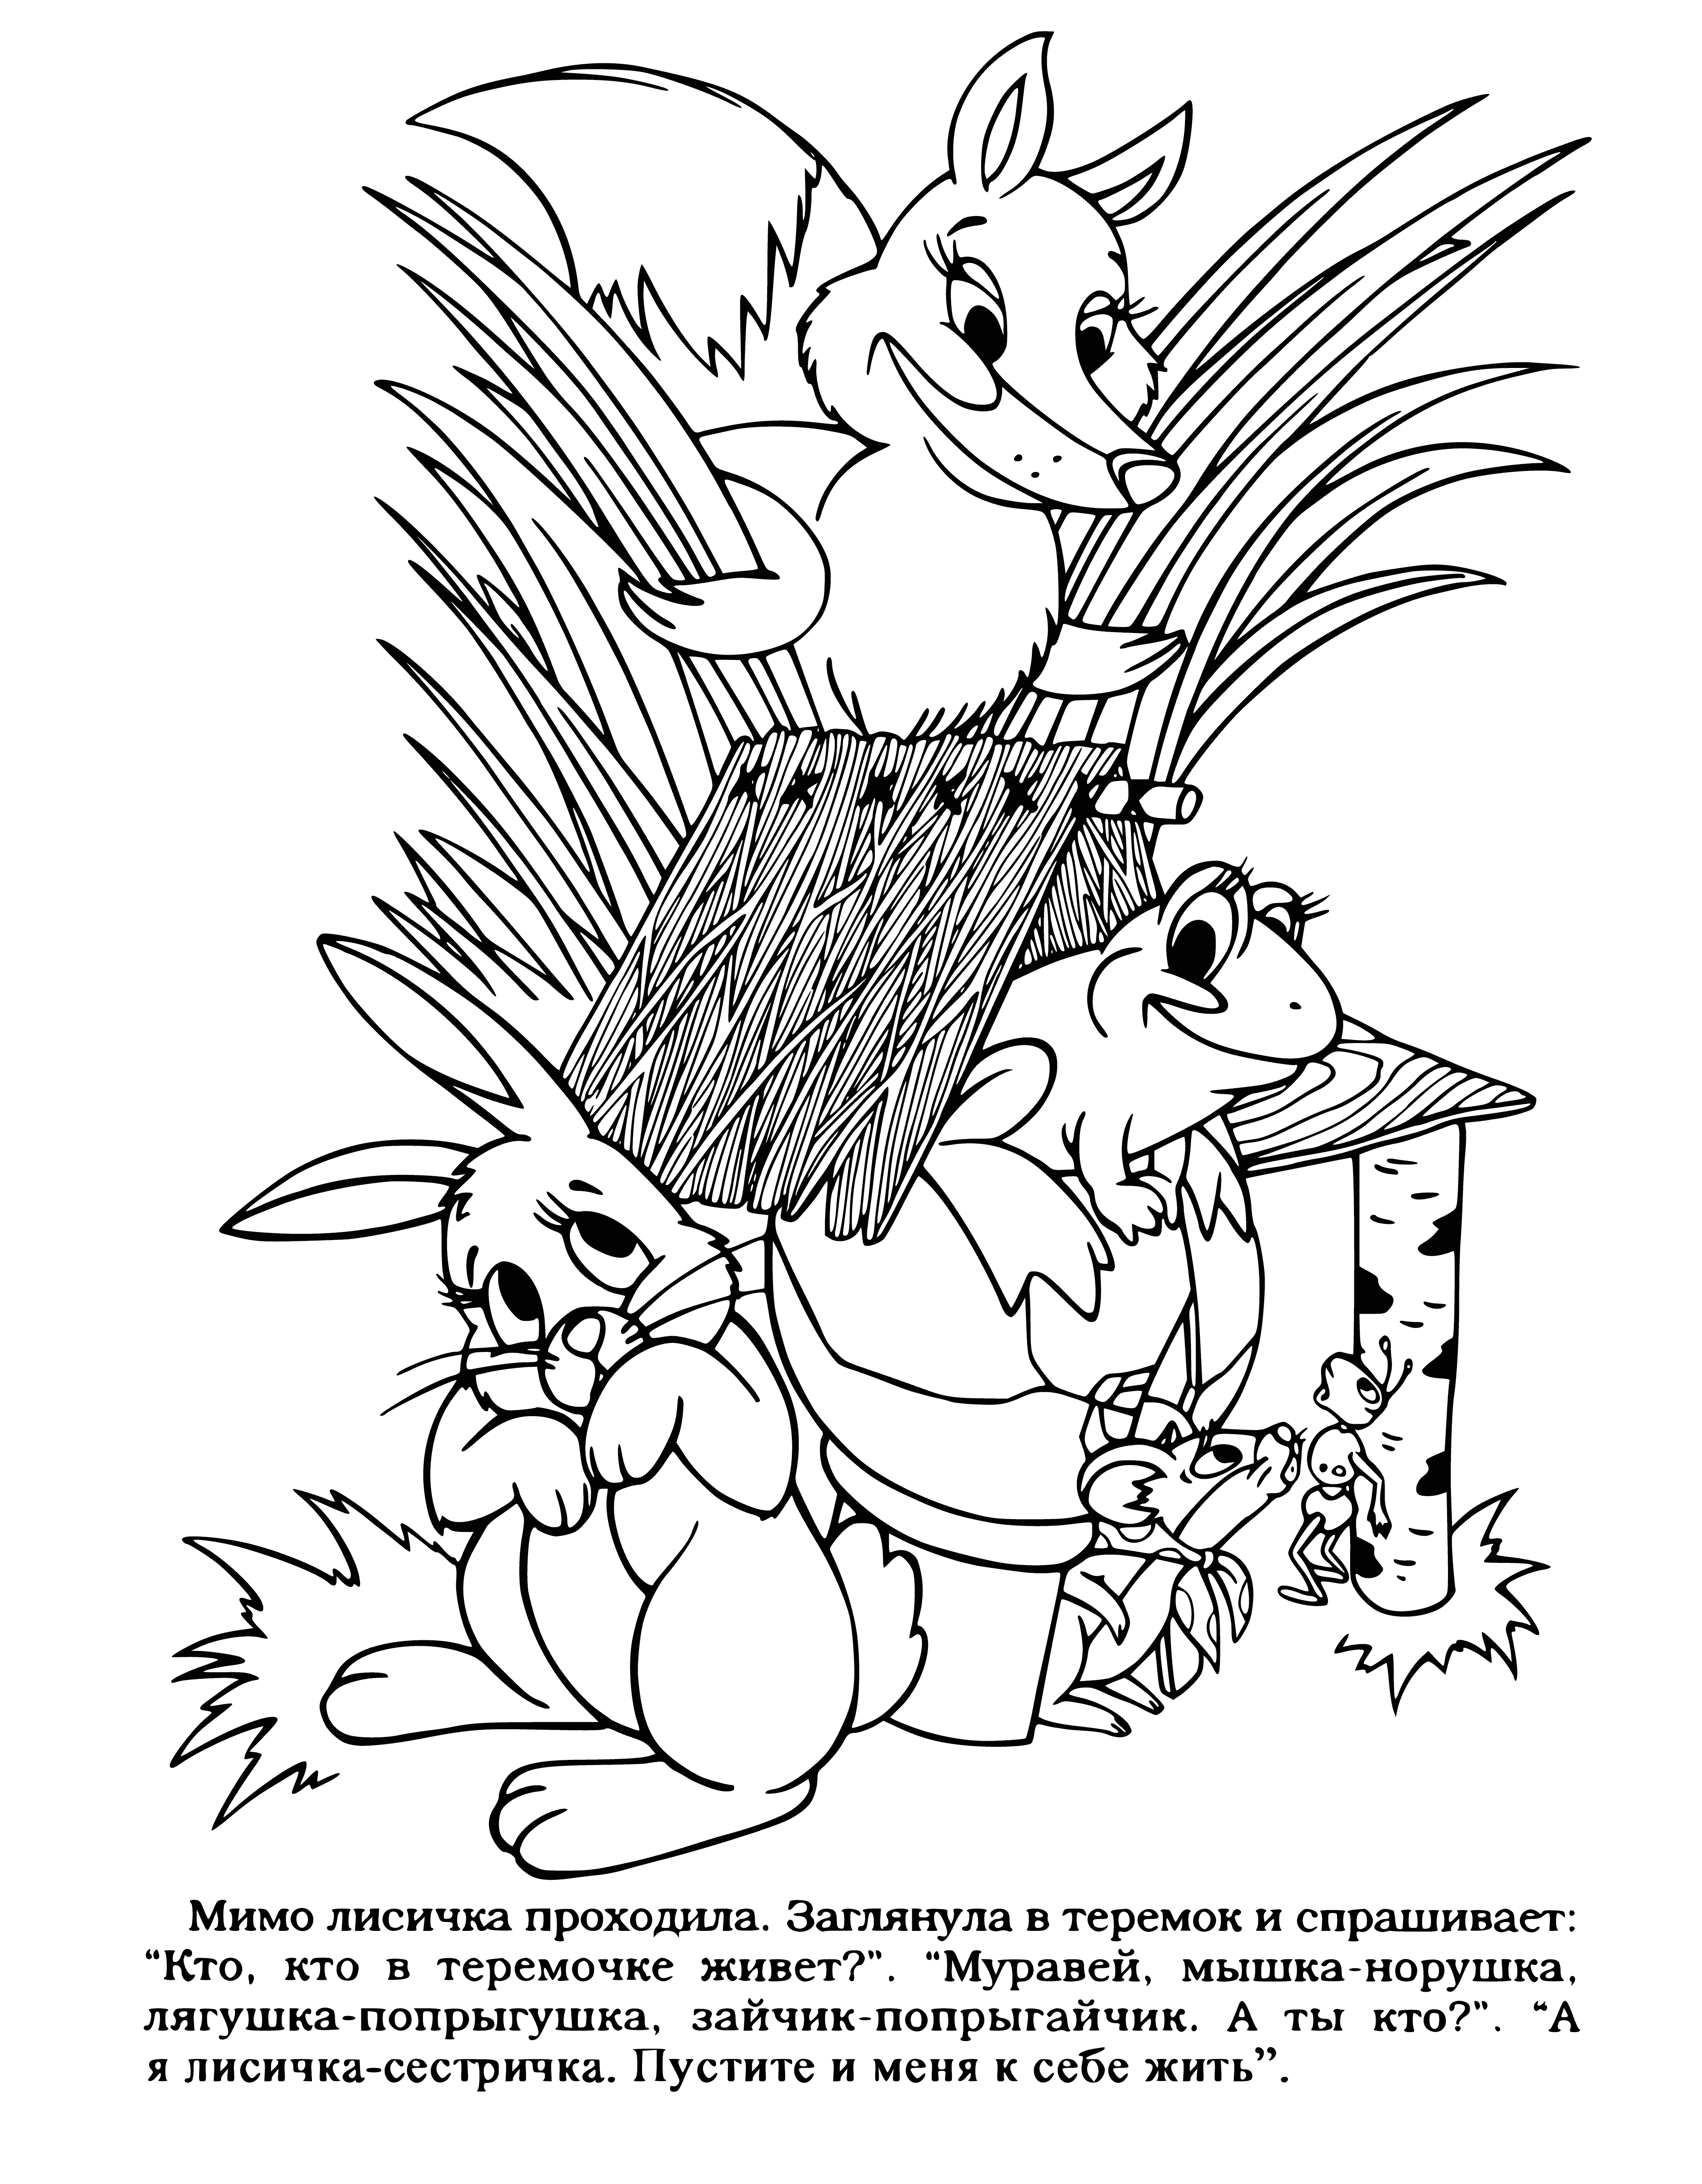 coloring page: Woman sternly knitting while fox looks up, mischievously trying to get her to feed it.